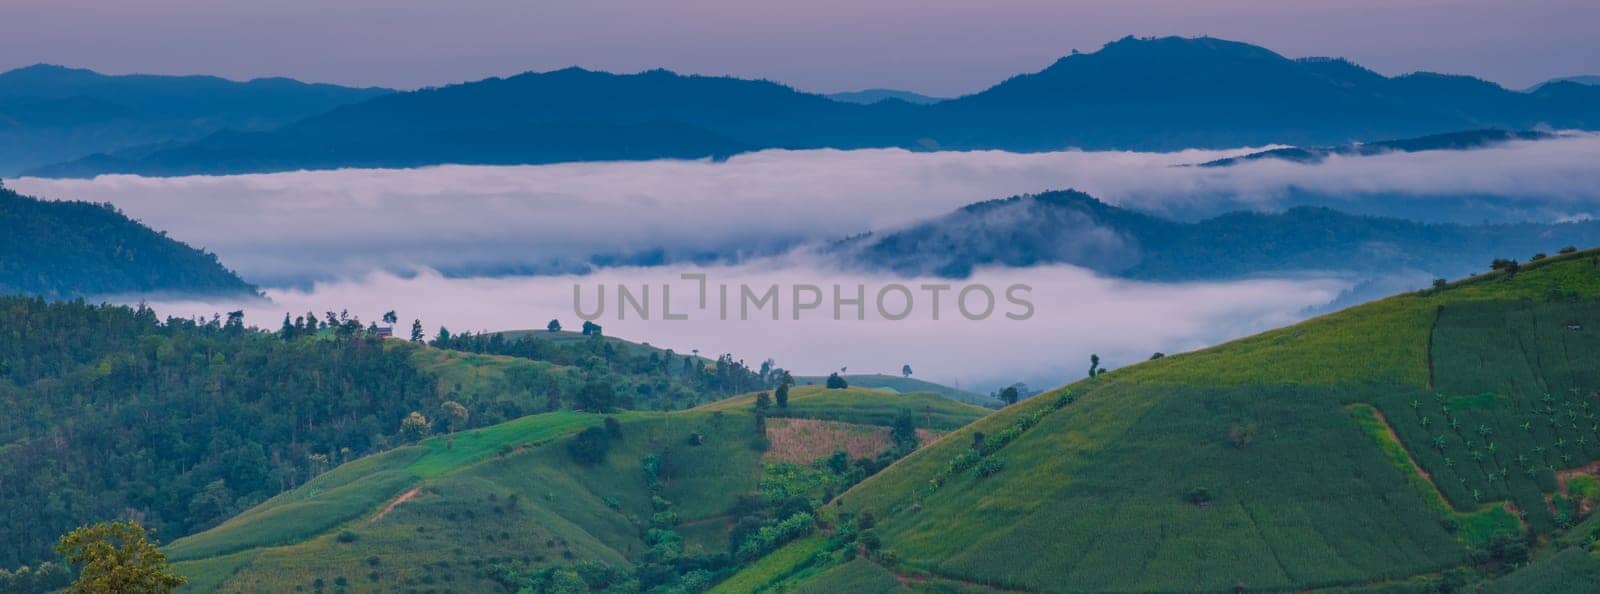 Terraced Rice Field in Chiangmai, Thailand, Pa Pong Piang rice terraces, green rice paddy fields during rain season during sunset with foggy clouds